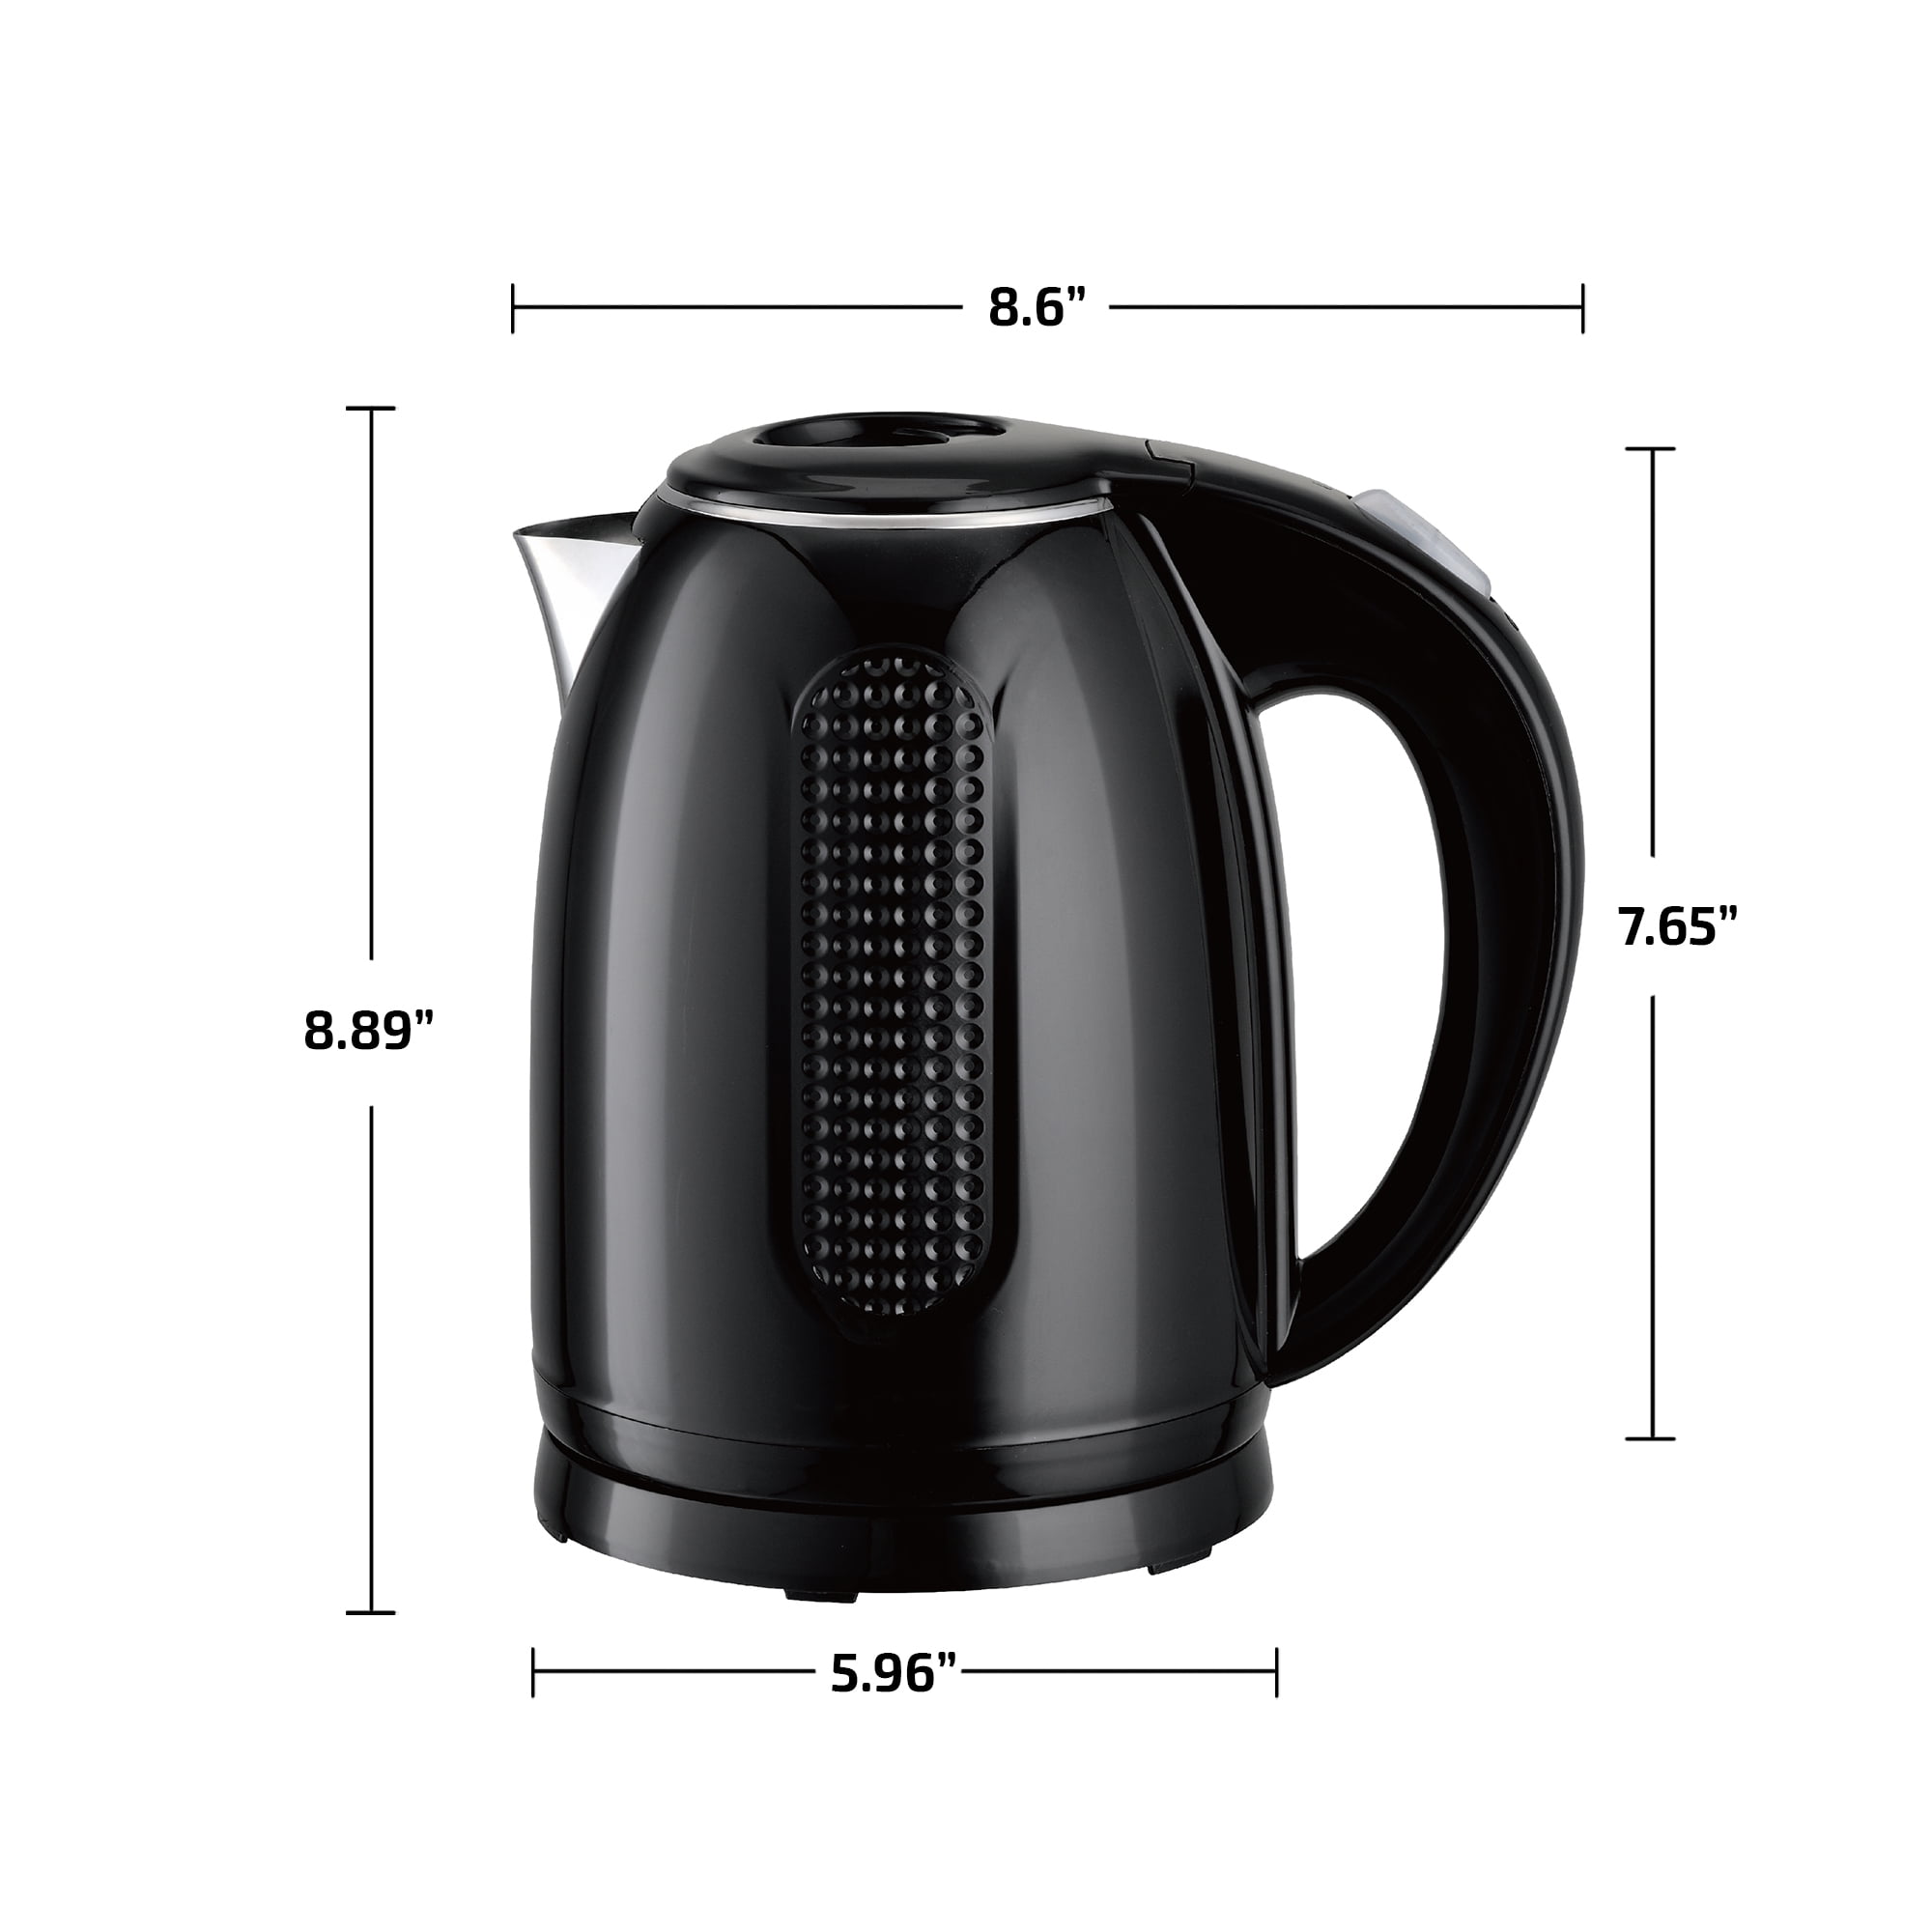 OVENTE Portable Electric Kettle Stainless Steel Instant Hot Water Boiler  Heater 1.7 Liter 1100W Double Wall Insulated Fast Boiling with Automatic  Shut Off for Coffee Tea & Cold Drinks, White KD64W 